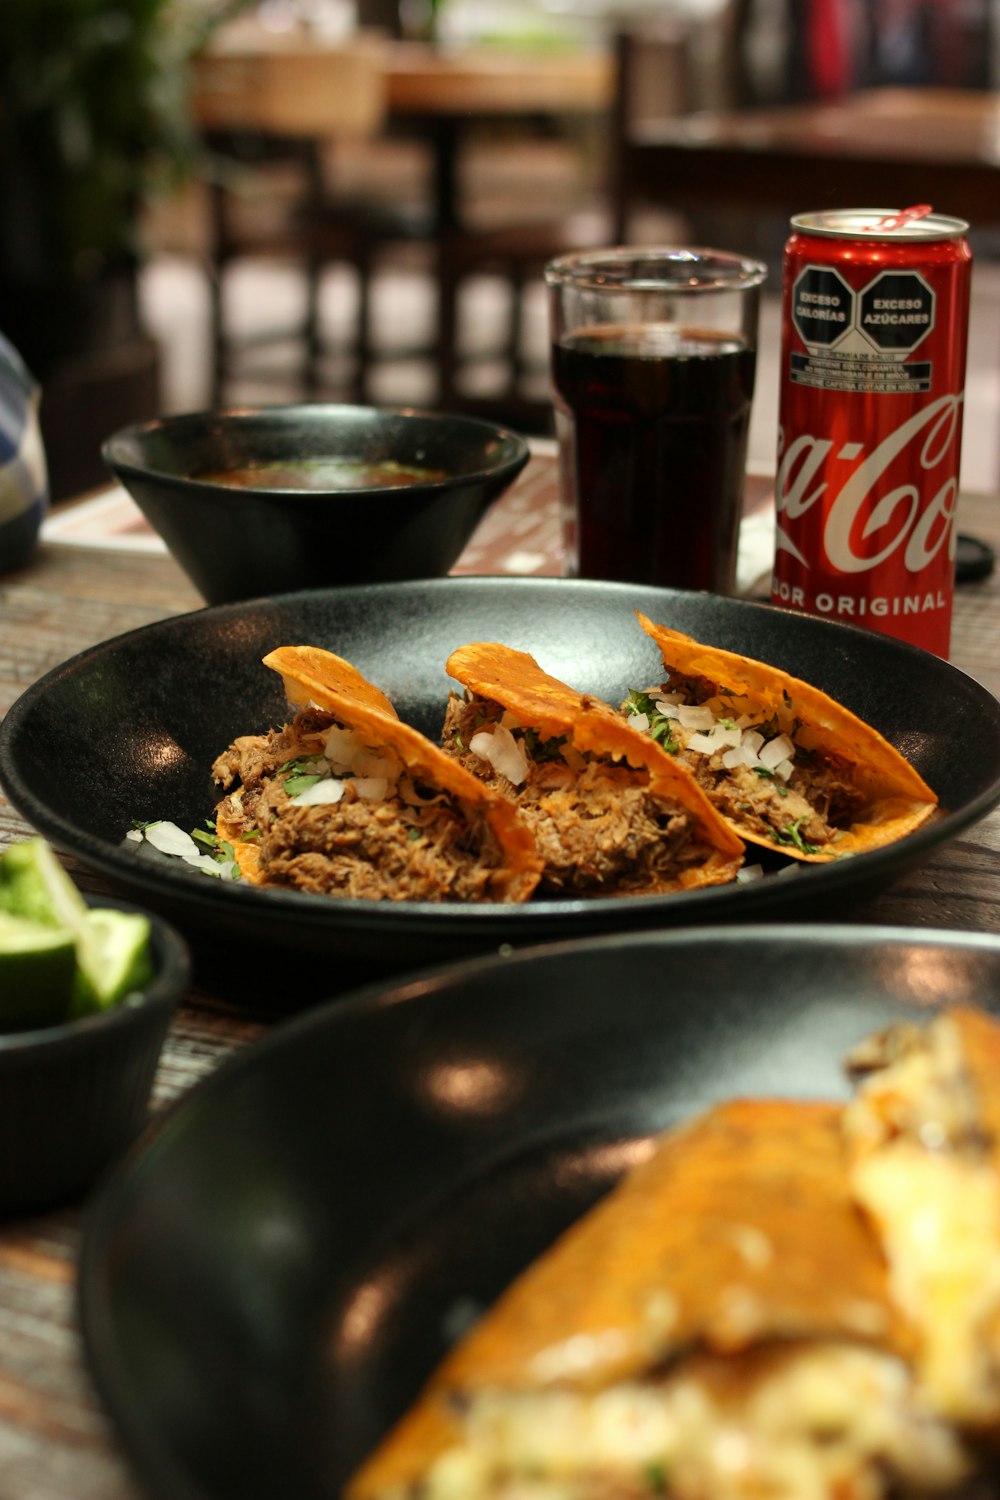 a plate of food and a can of beer on a table